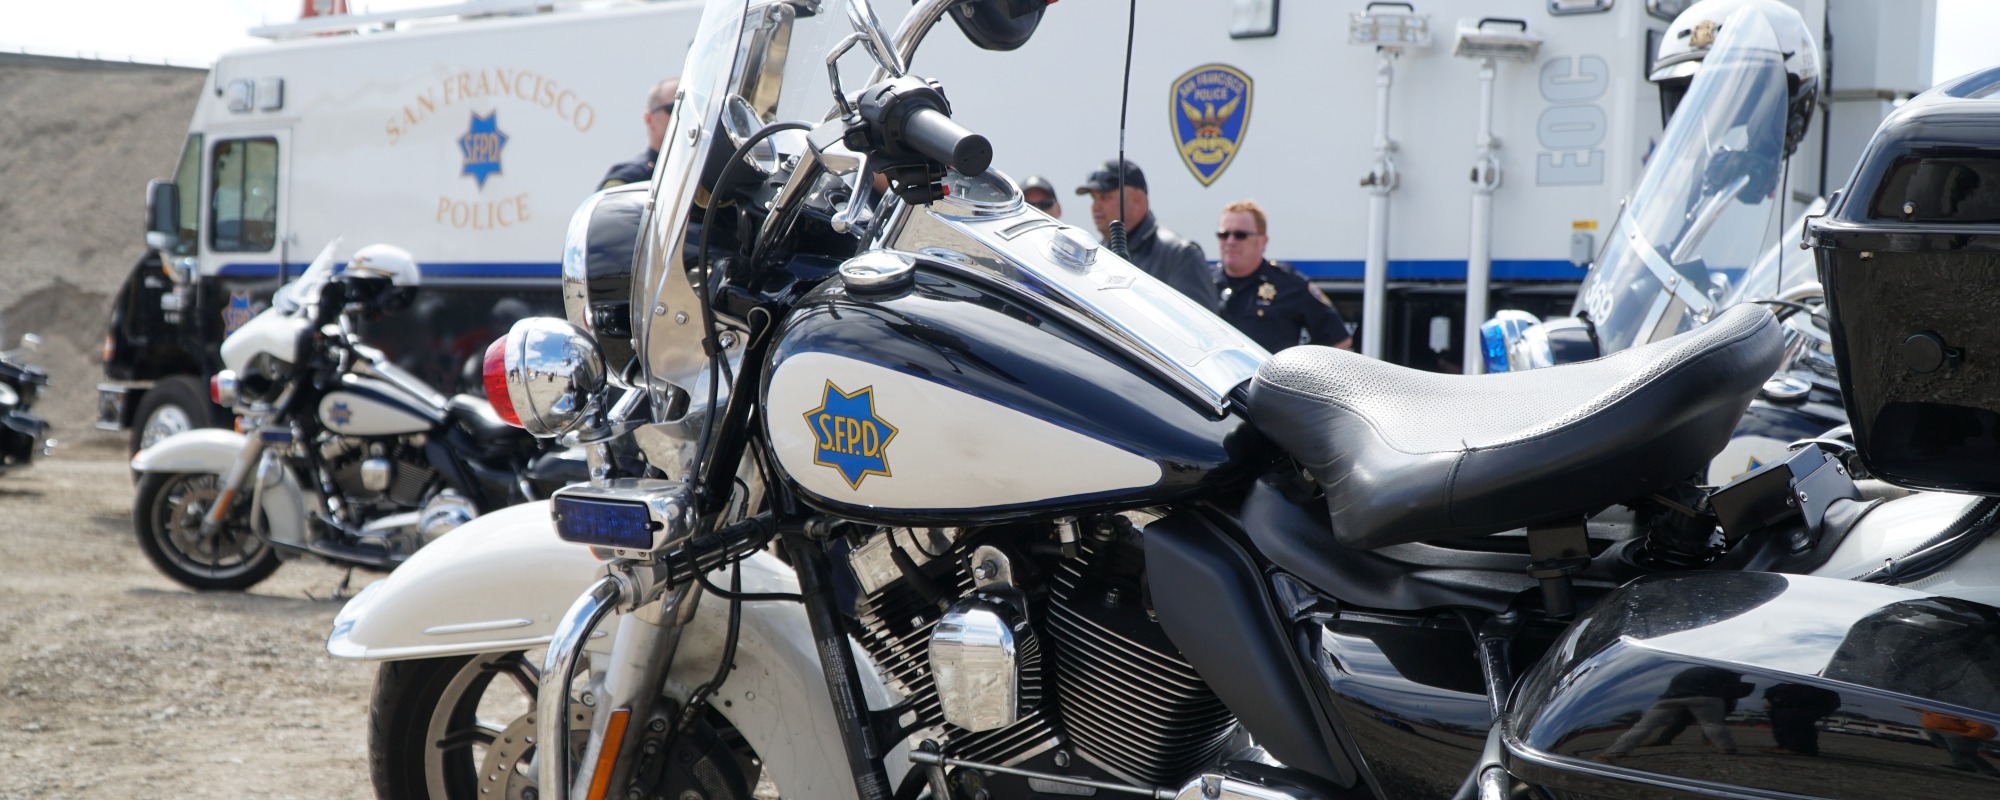 San Francisco Police Department motorcycles at the Traffic Company and Forensic Services Division facility groundbreaking event